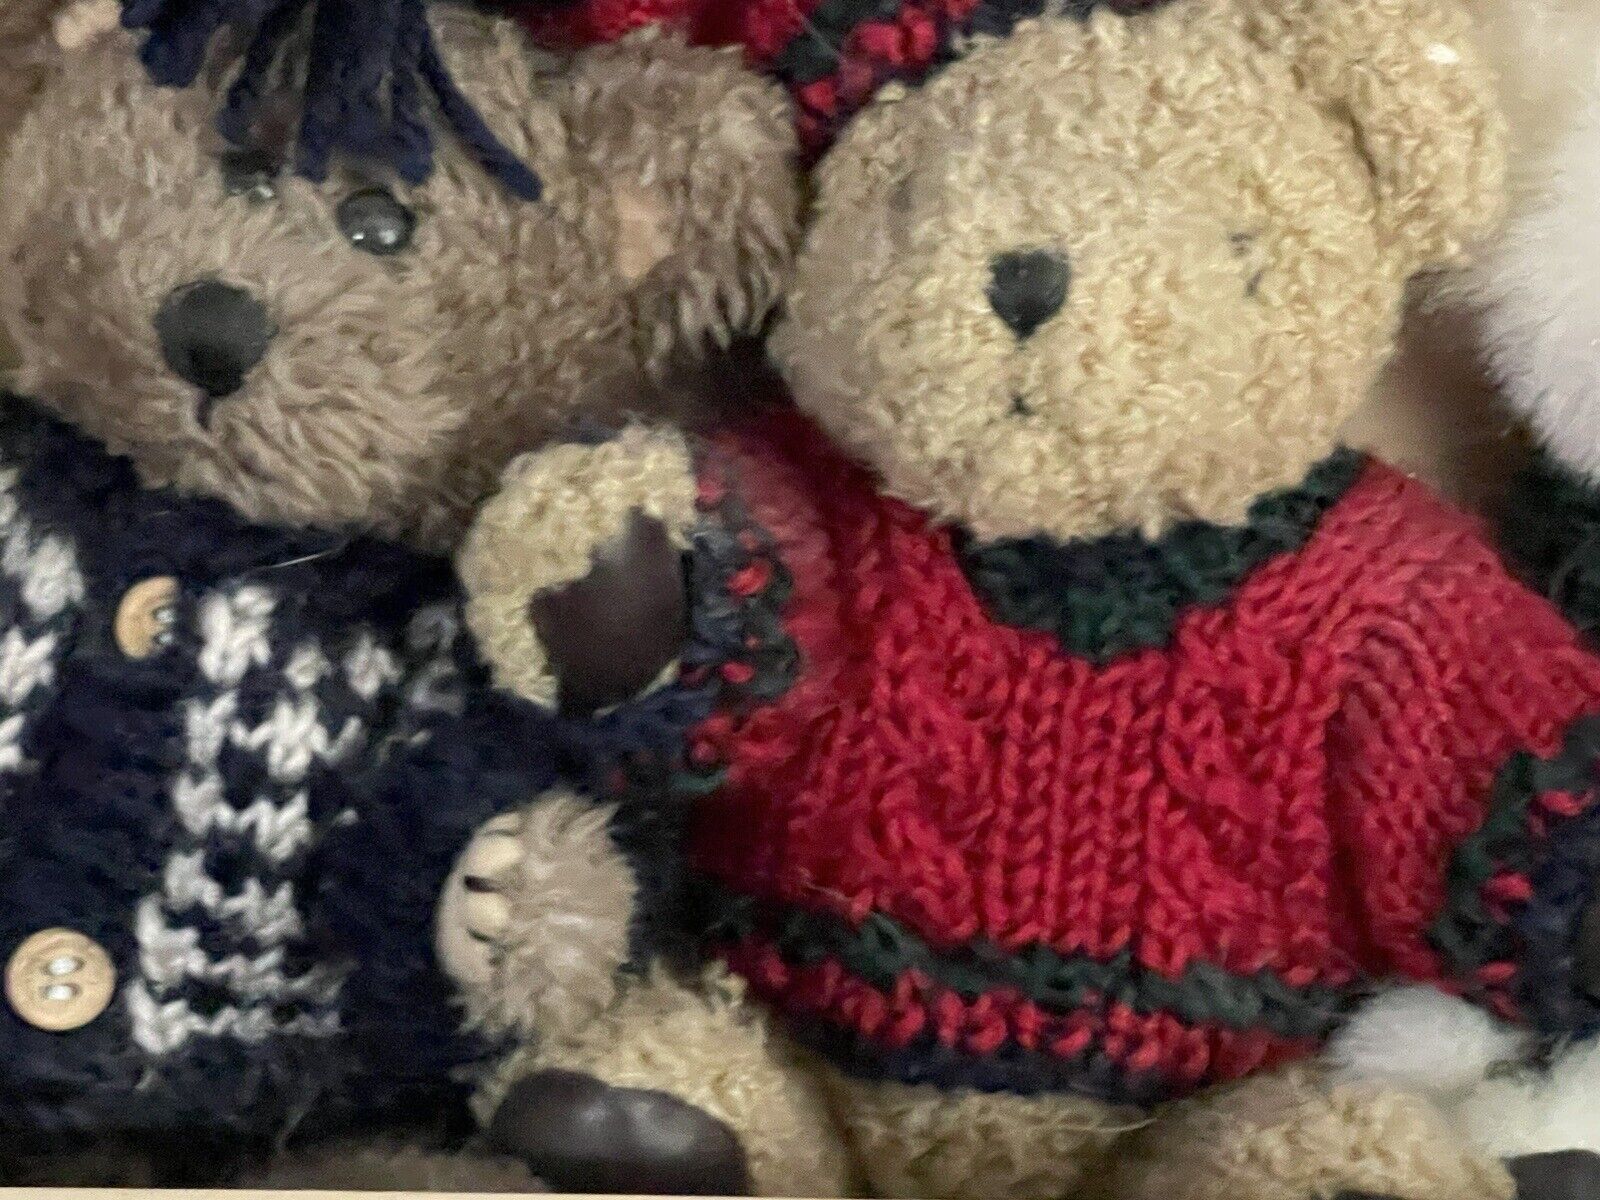 HugFun 7 Teddy Bear Collection in Hand Made in Knitted Sweaters - New